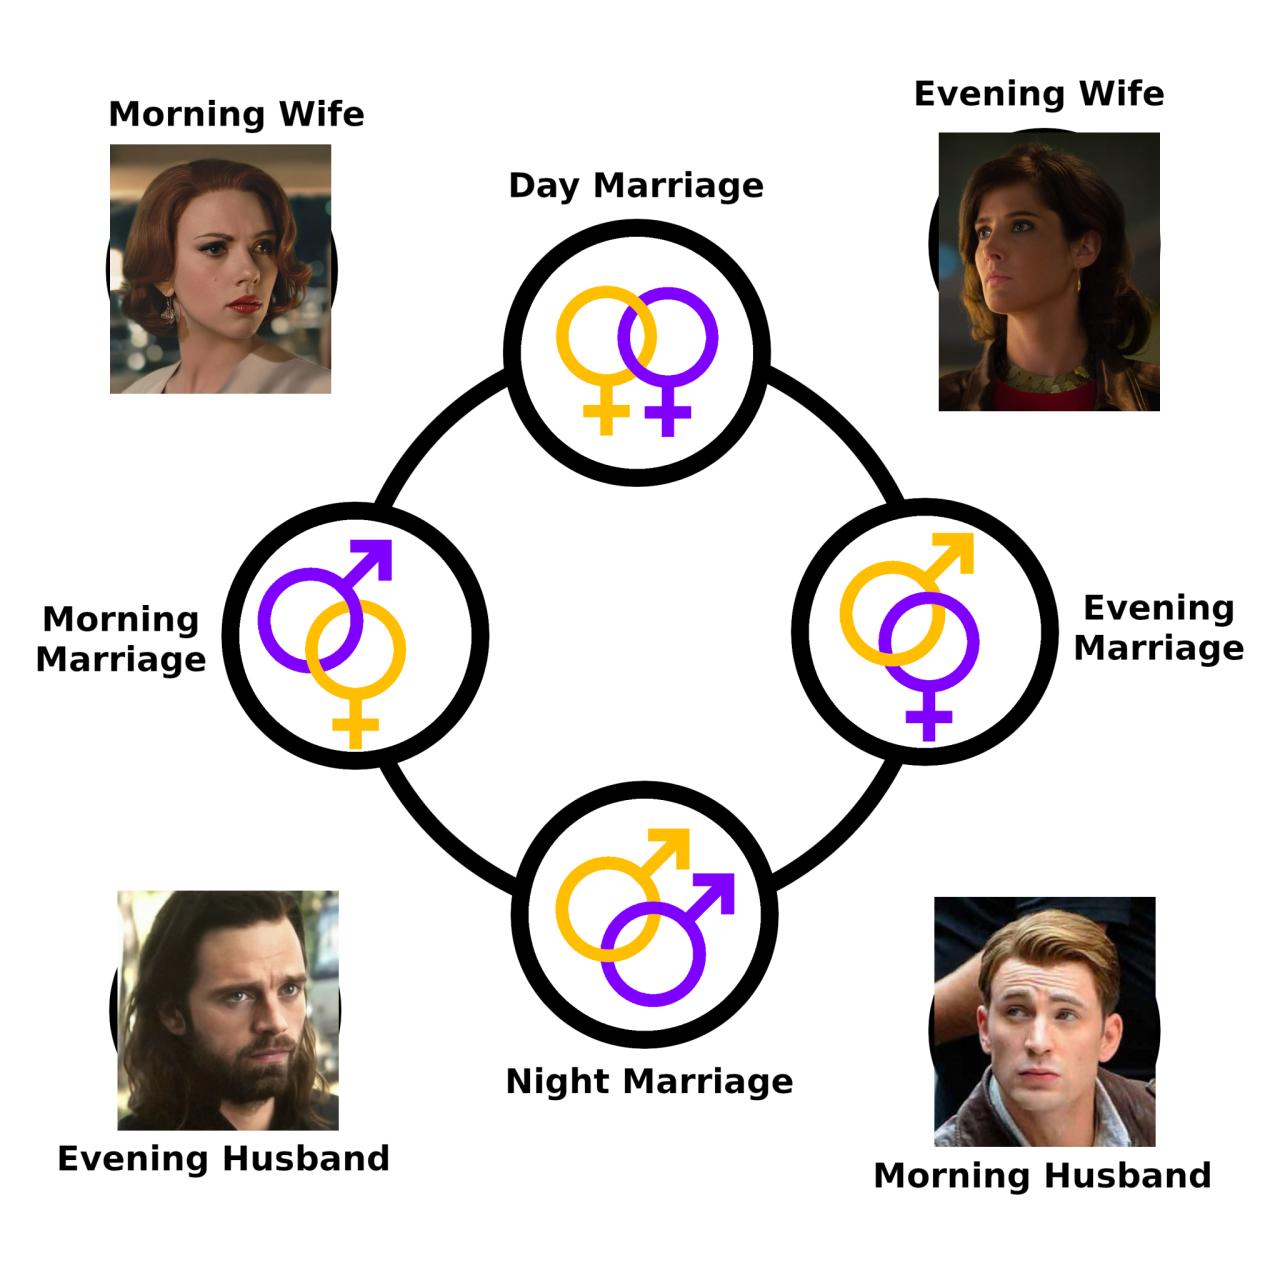 a diagram of a sedoretu relationship. There are four pictures in the four corners. Top left is Natasha, labelled Morning Wife. Top right is Maria, Evening Wife. Bottom left is Bucky Barnes, Evening Husband. Bottom Right is Steve, Morning Husband.

The middle of the chart is a big circle with four smaller circles at top, bottom, left, and right, each with a pair of purple and yellow man and woman signs. Top is the Day Marriage, with purple and yellow woman signs (Natasha/Maria). Right is Evening Marriage, with a yellow man and purple woman sign (Steve/Maria). Bottom is Night Marriage, with yellow and purple man signs (Steve/Bucky). Left is Morning Marriage, with purple woman and yellow man signs (Bucky/Natasha).